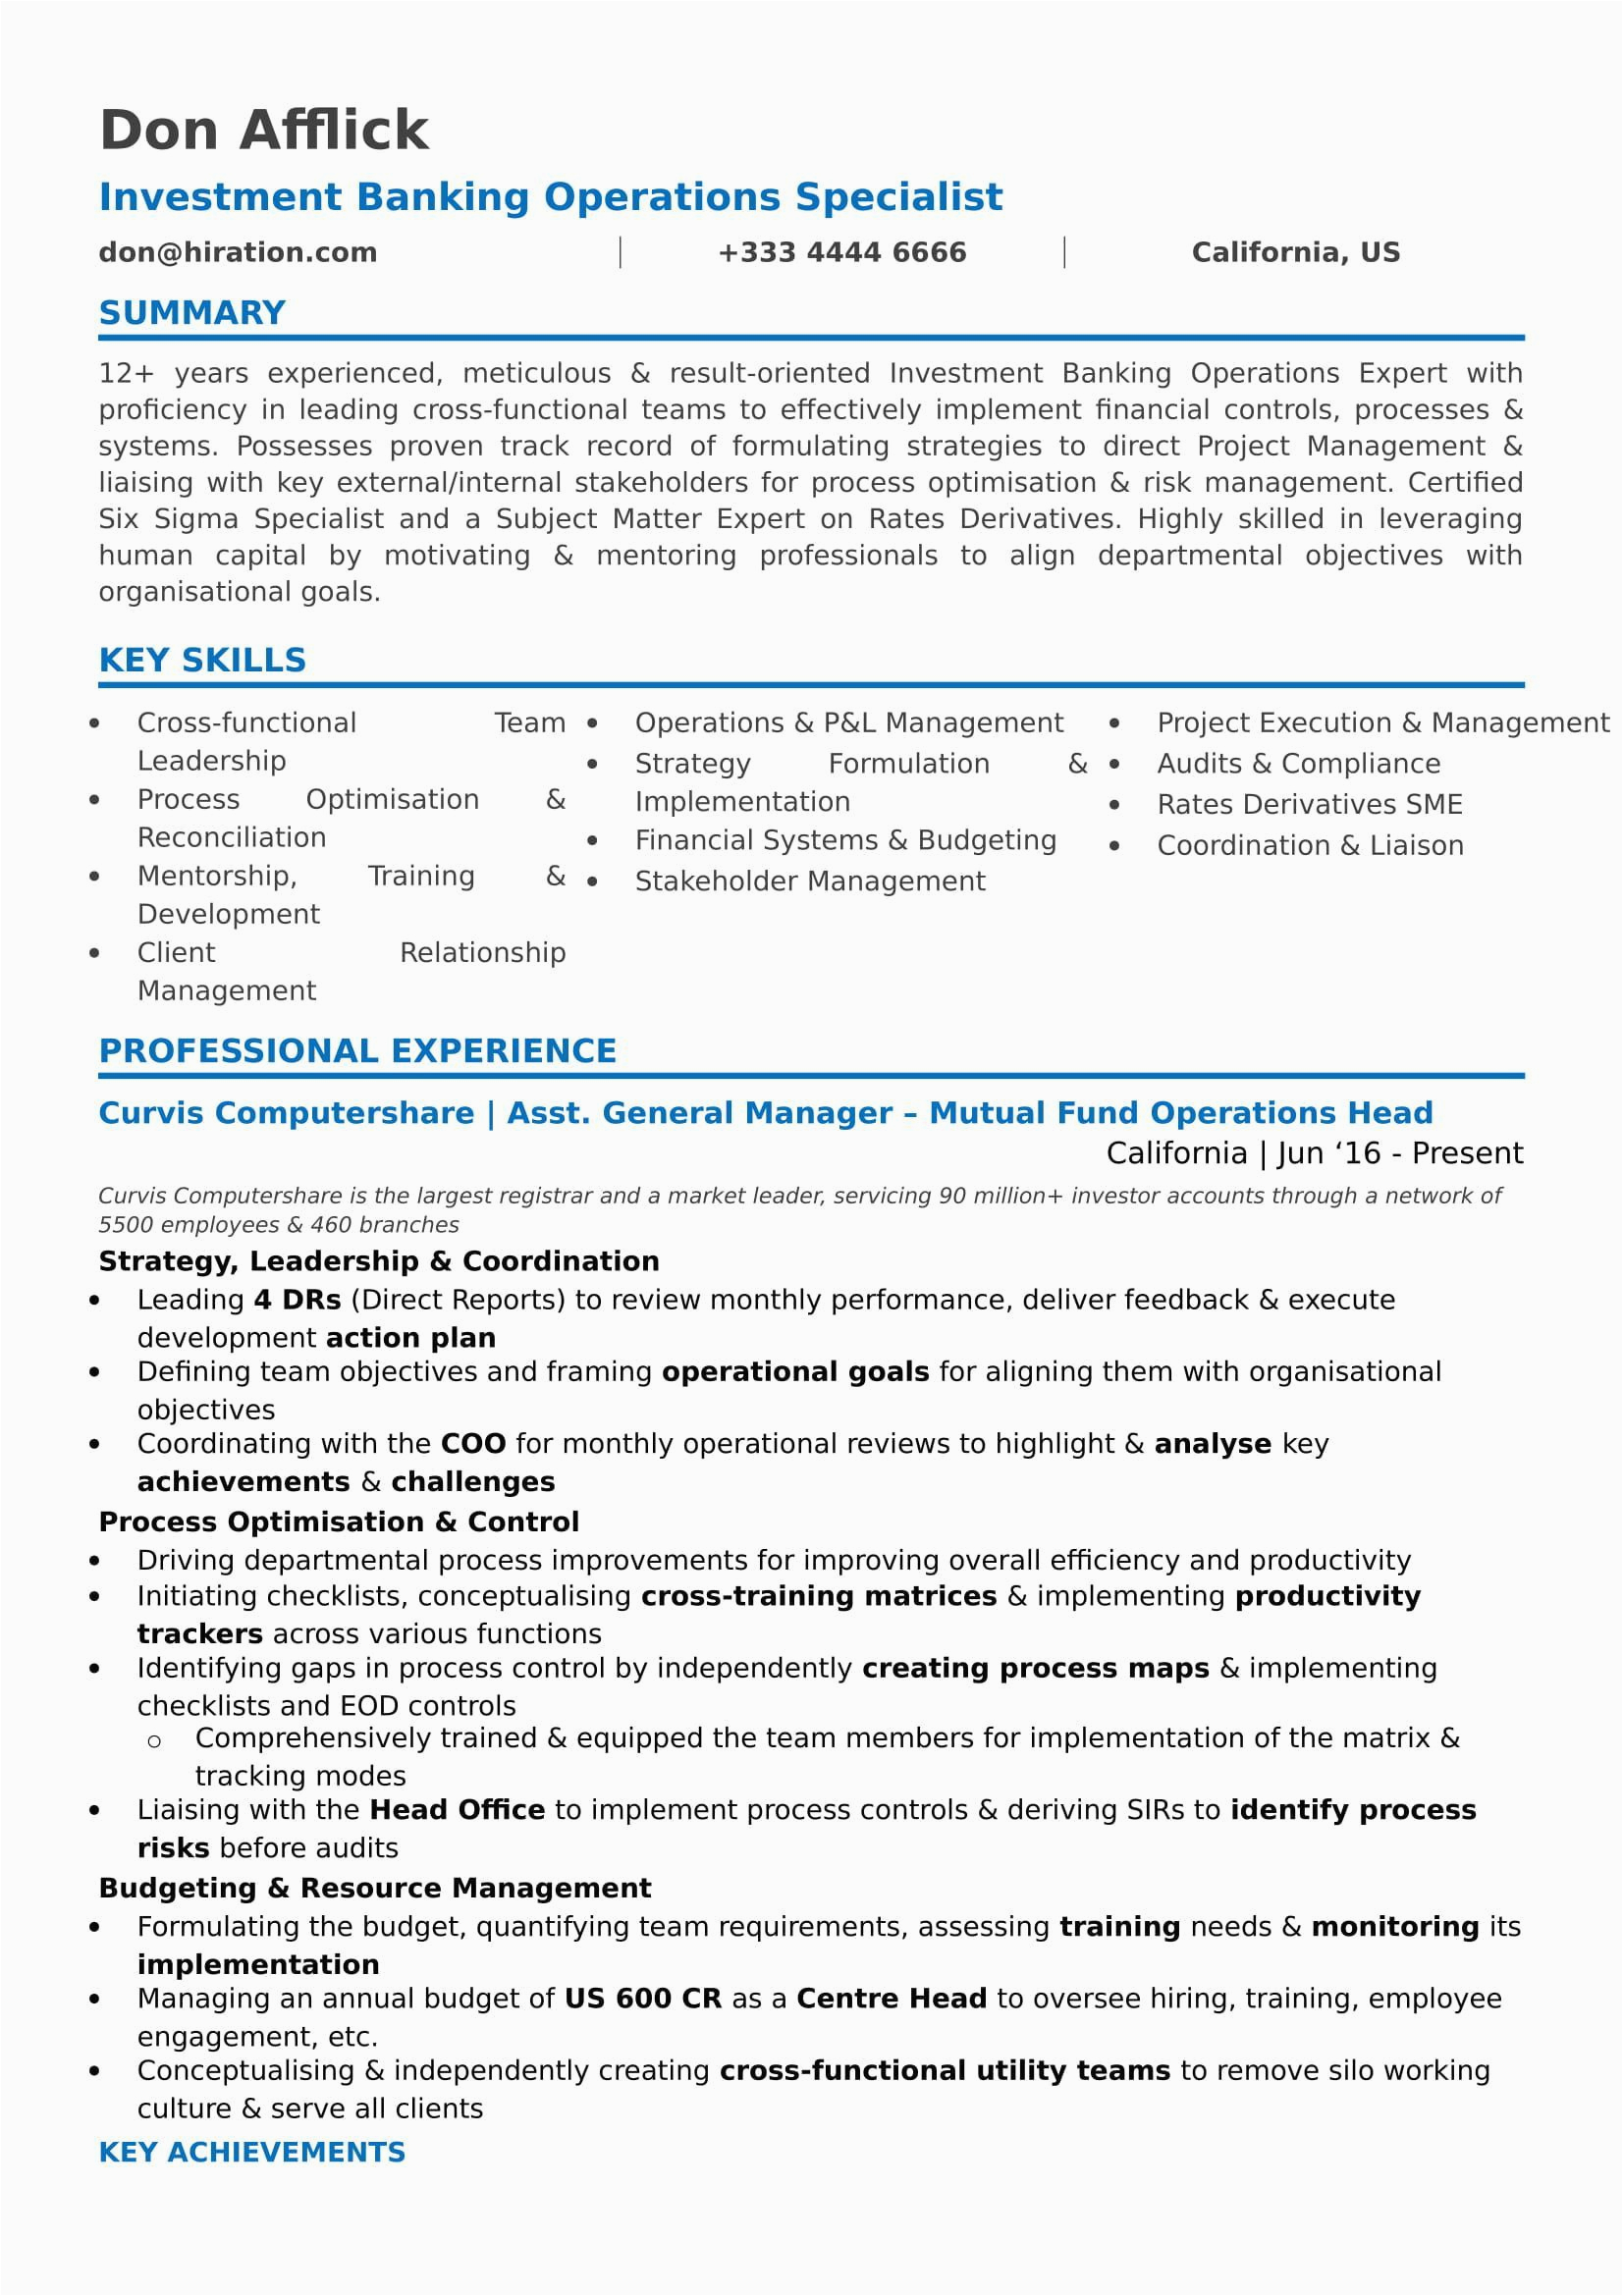 Samples Of Functional Resumes for Career Change Career Change Resume [2019] Guide to Resume for Career Change